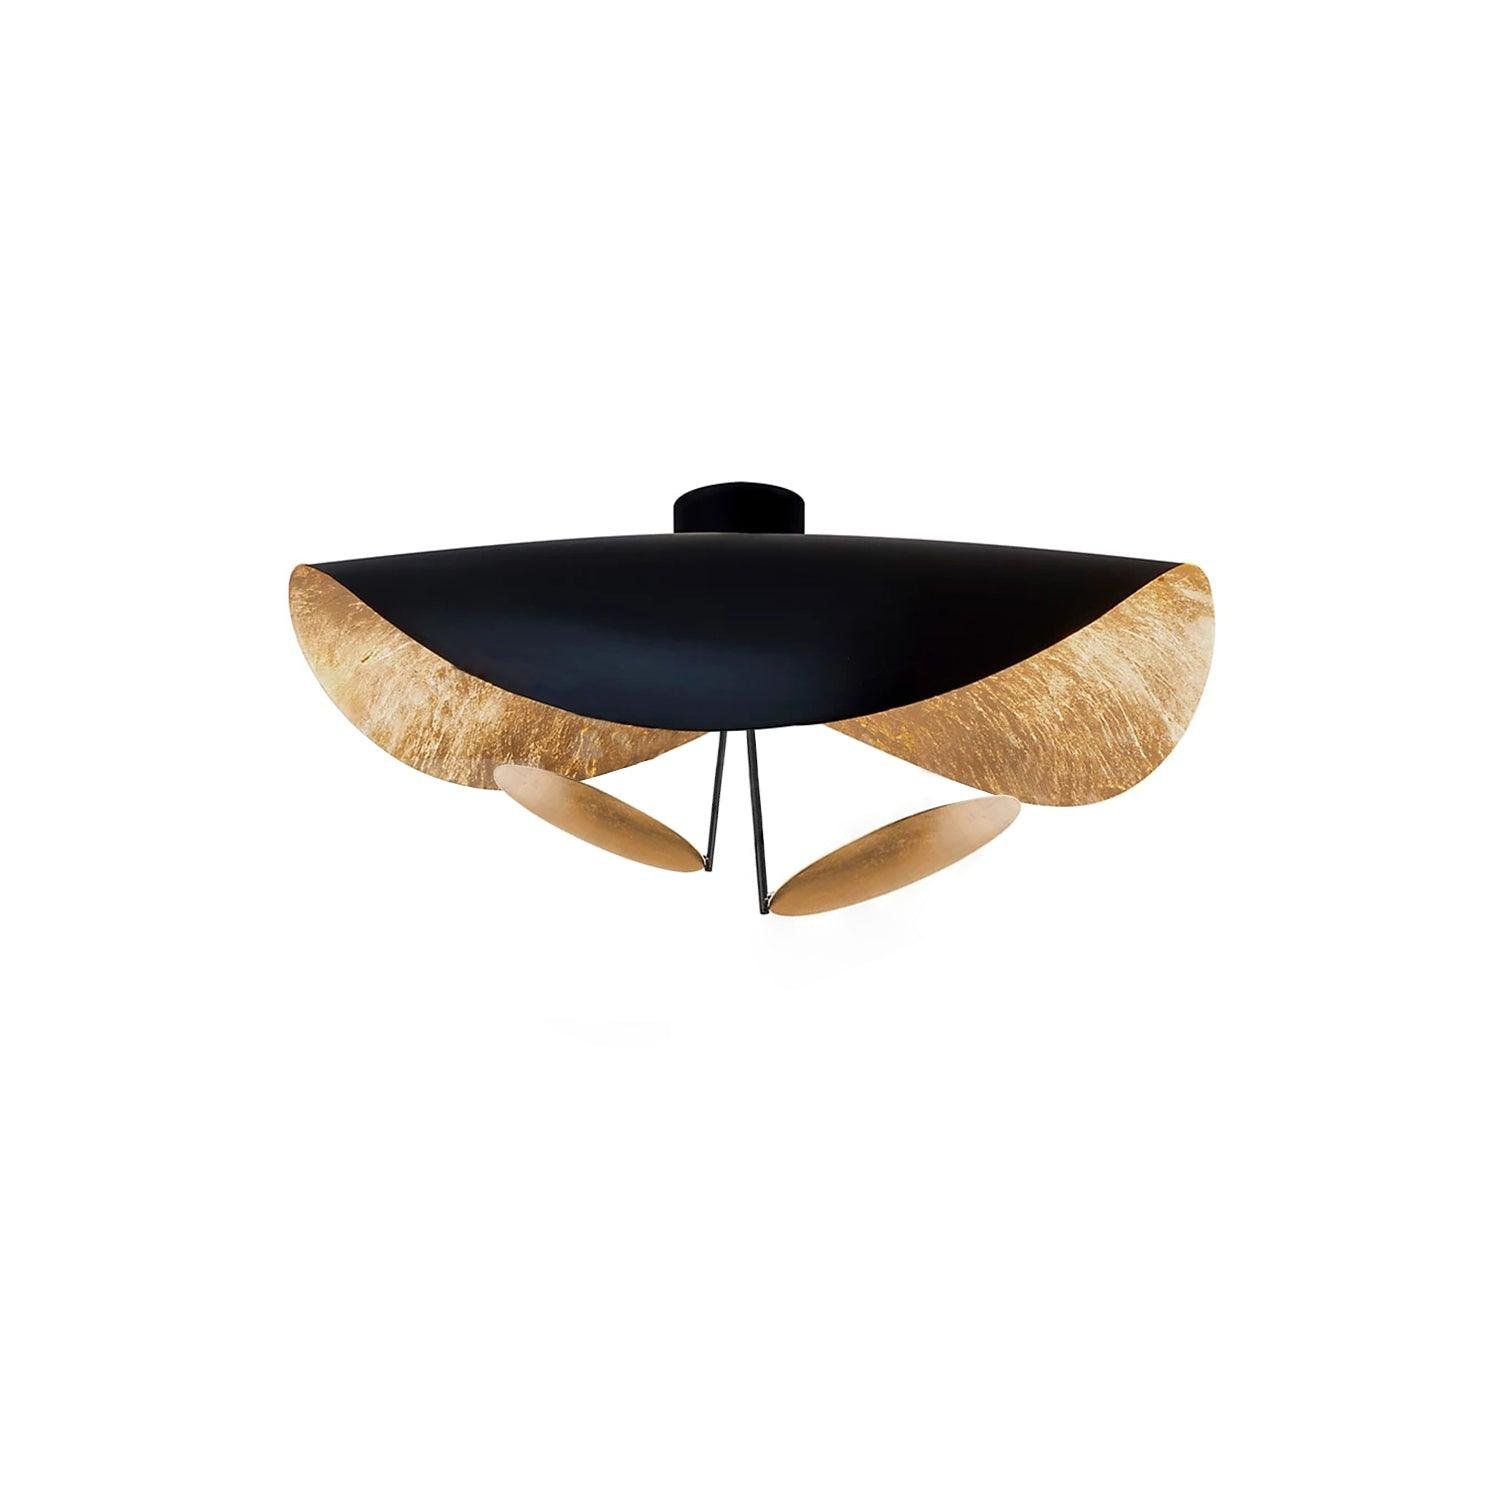 Black+Gold Lederam Manta Ceiling Light in Cool White (6000K), with a diameter of 31.5 inches and a height of 15.7 inches (80cm x 40cm).